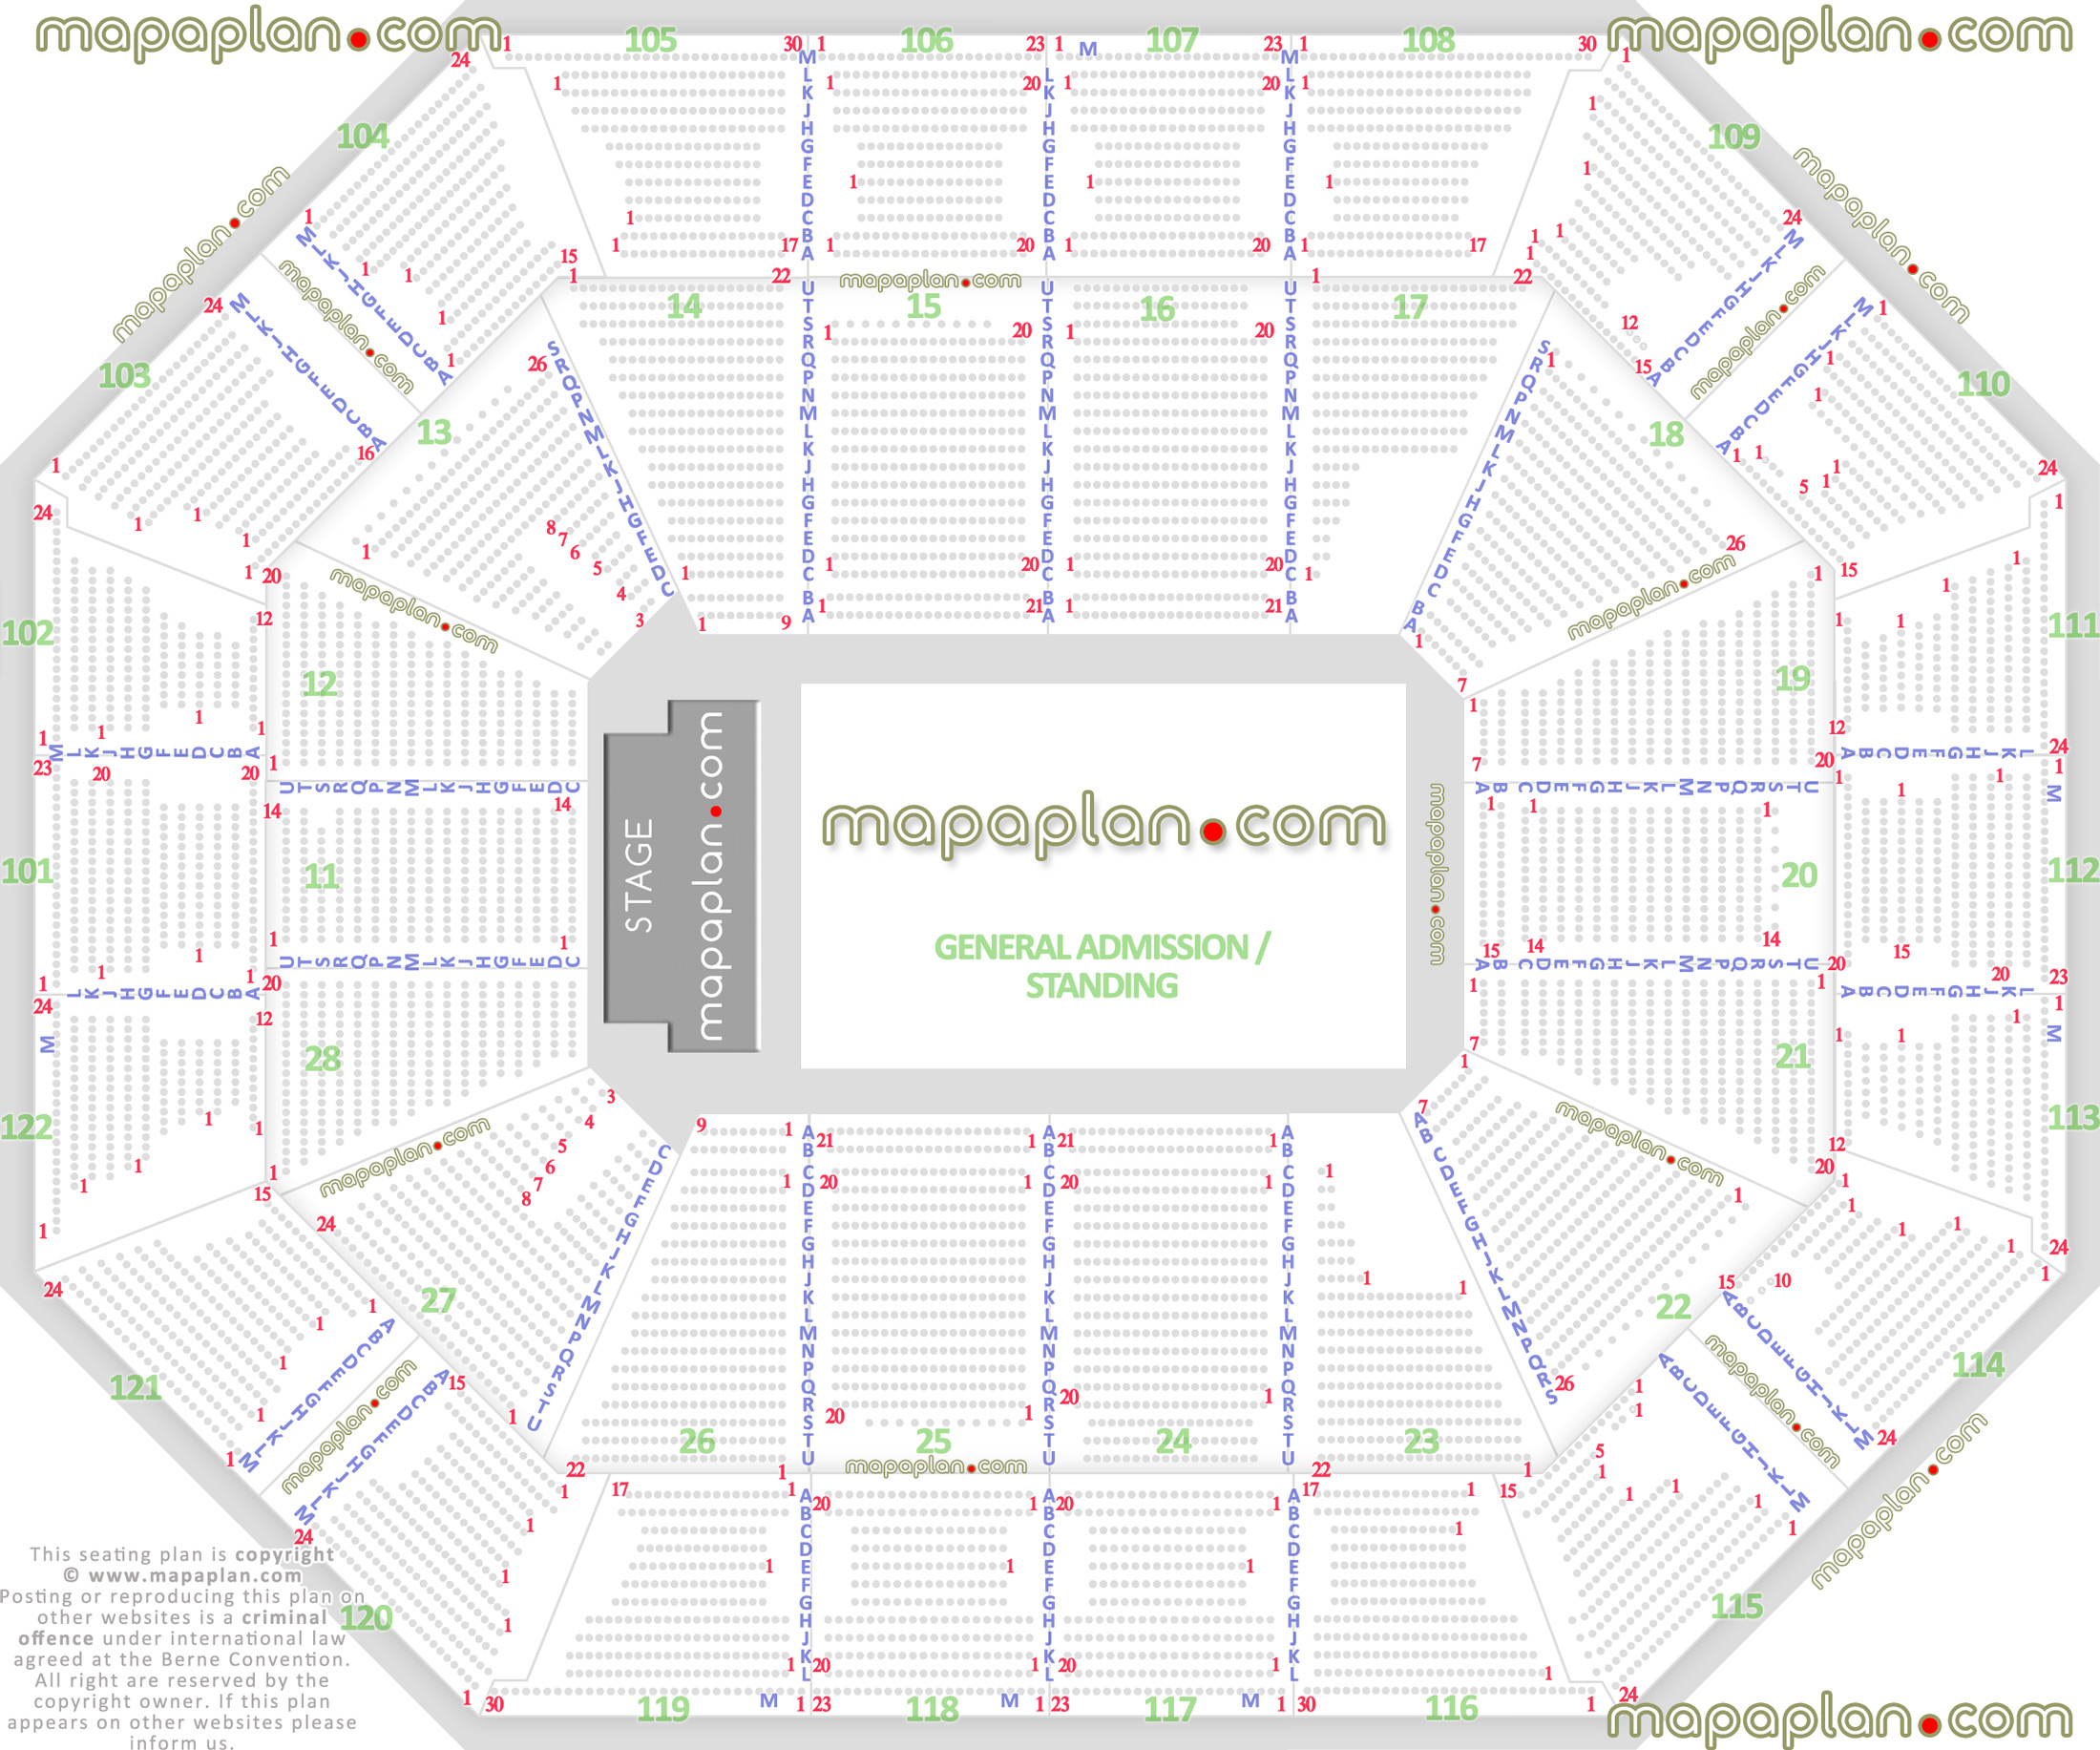 general admission floor standing concert plan mohegan sun resort and casino connecticut us how many seats per row sections 11 12 13 14 15 16 17 18 19 20 21 22 23 24 25 26 27 28 Uncasville Mohegan Sun Arena seating chart